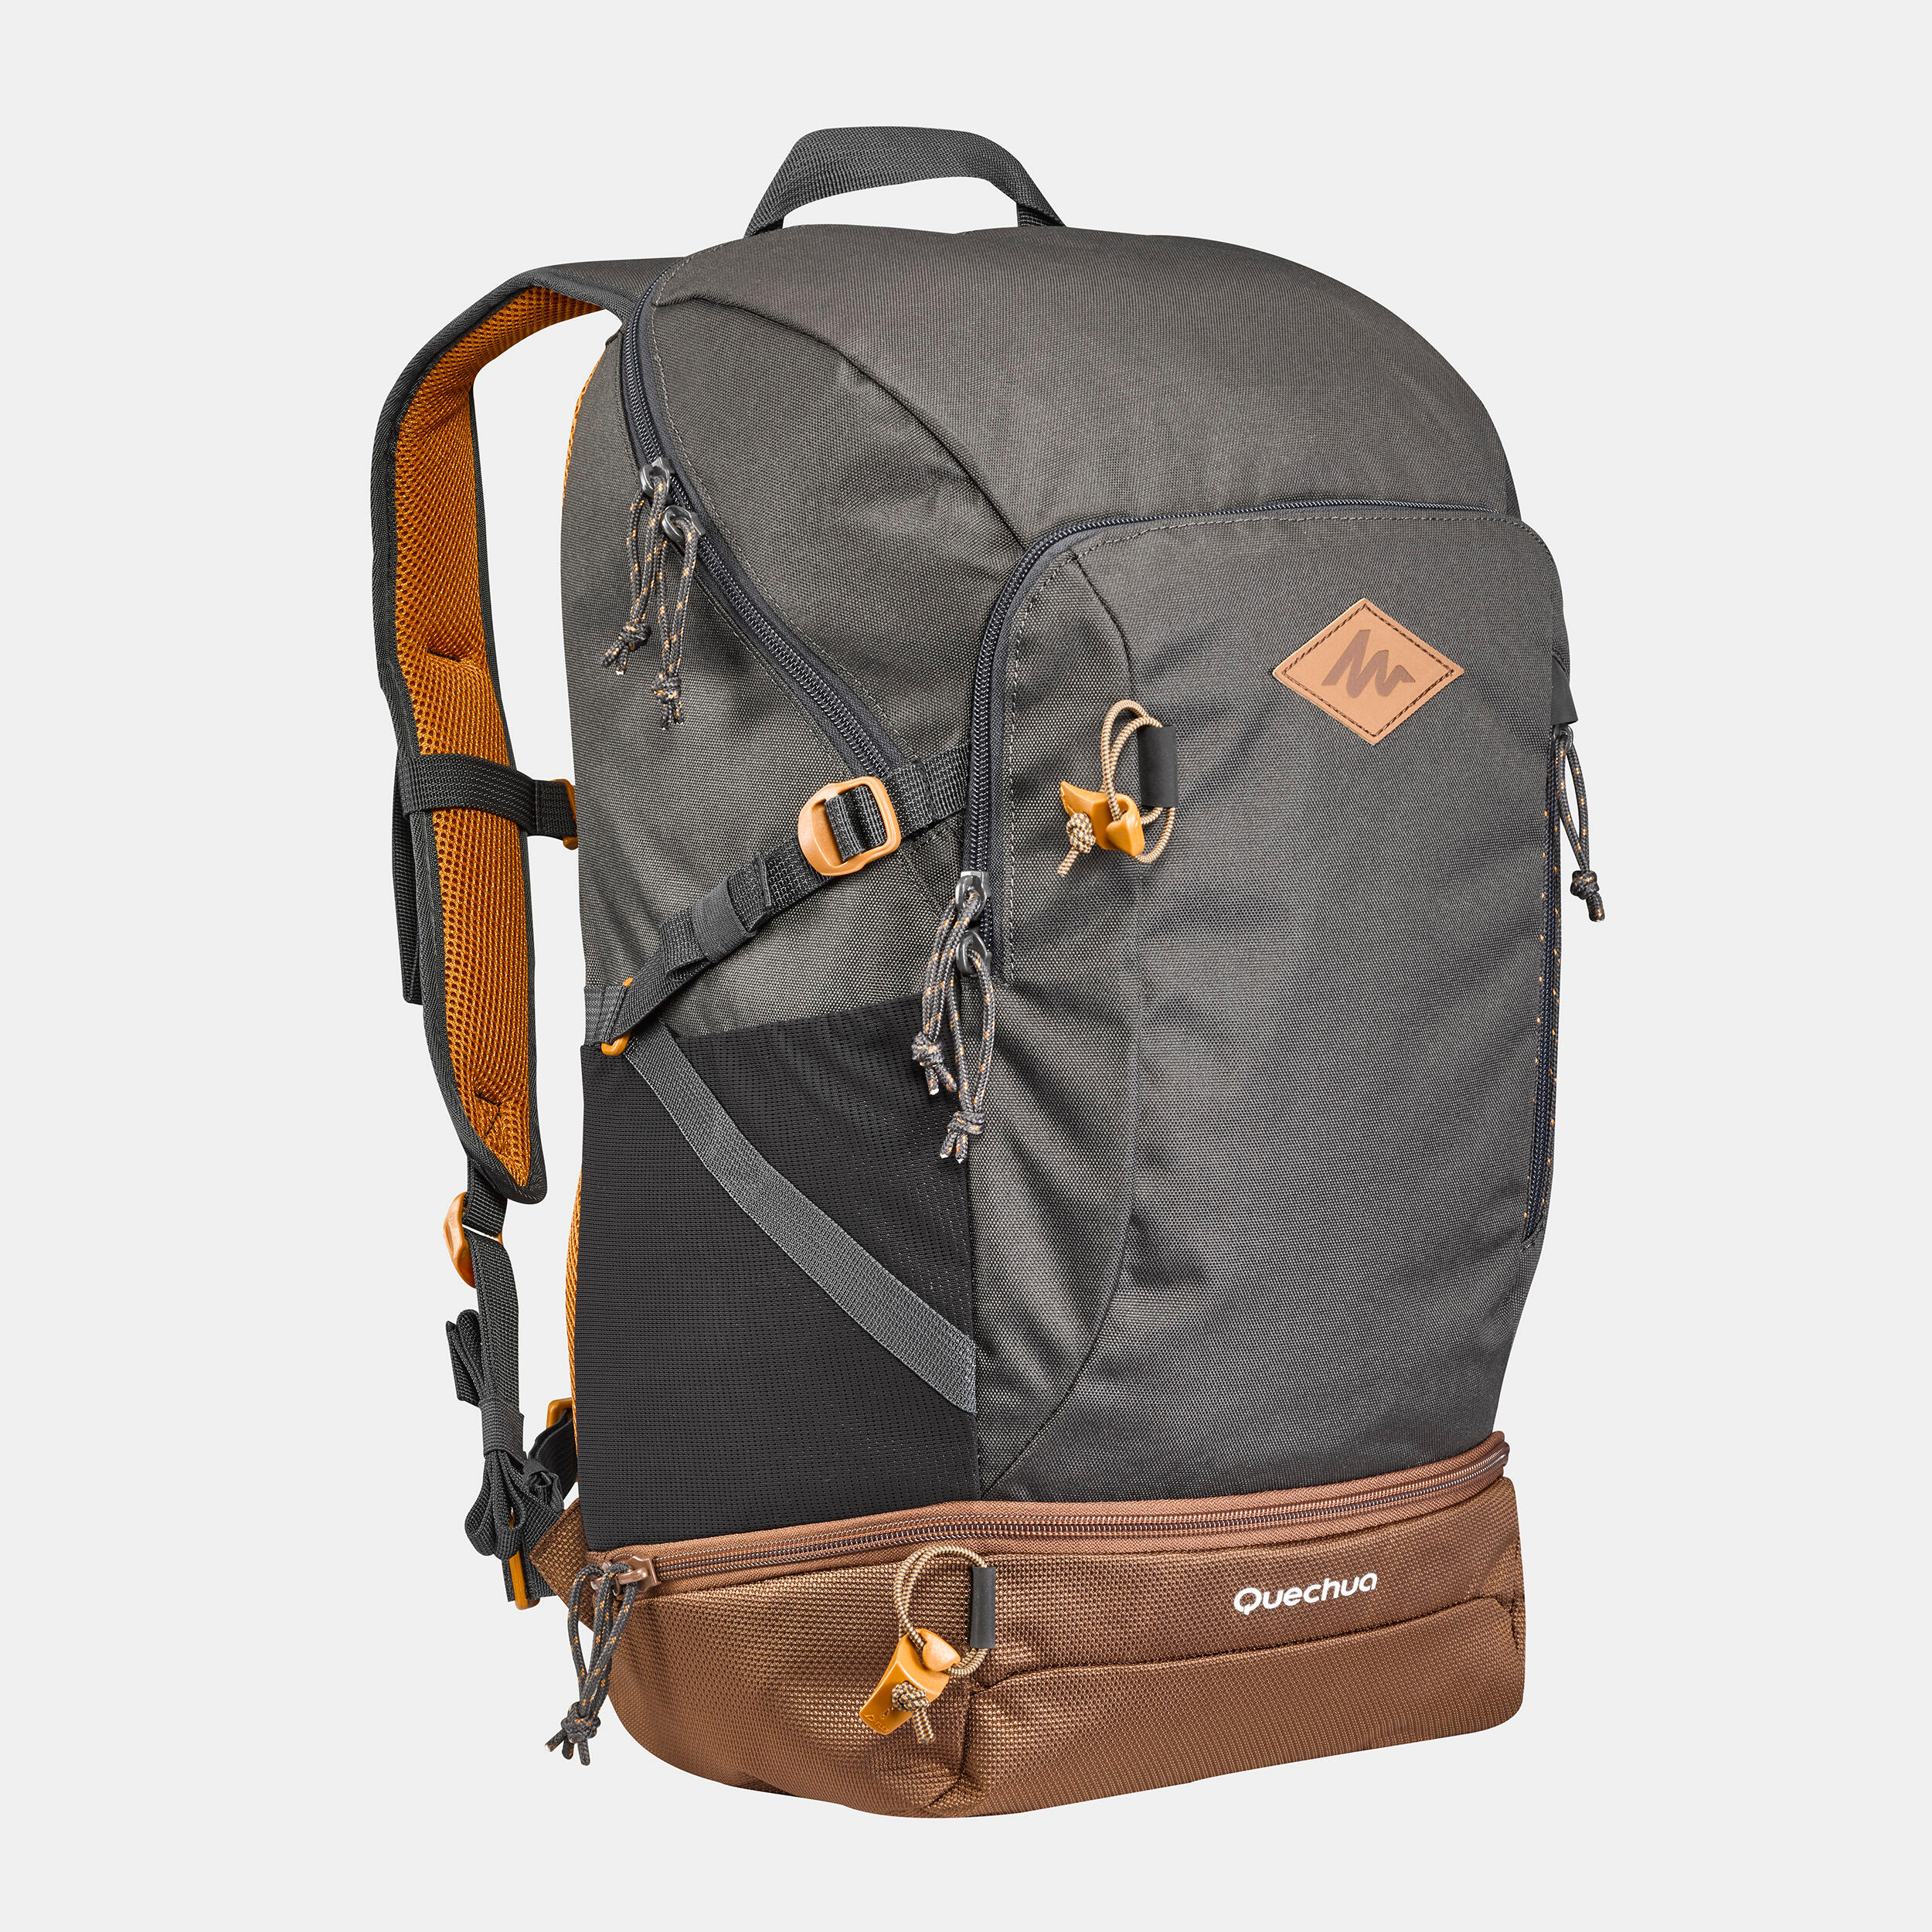 Decathlon Quenchua Hiking Backpack 30L NH500 Details - One Bag Travel